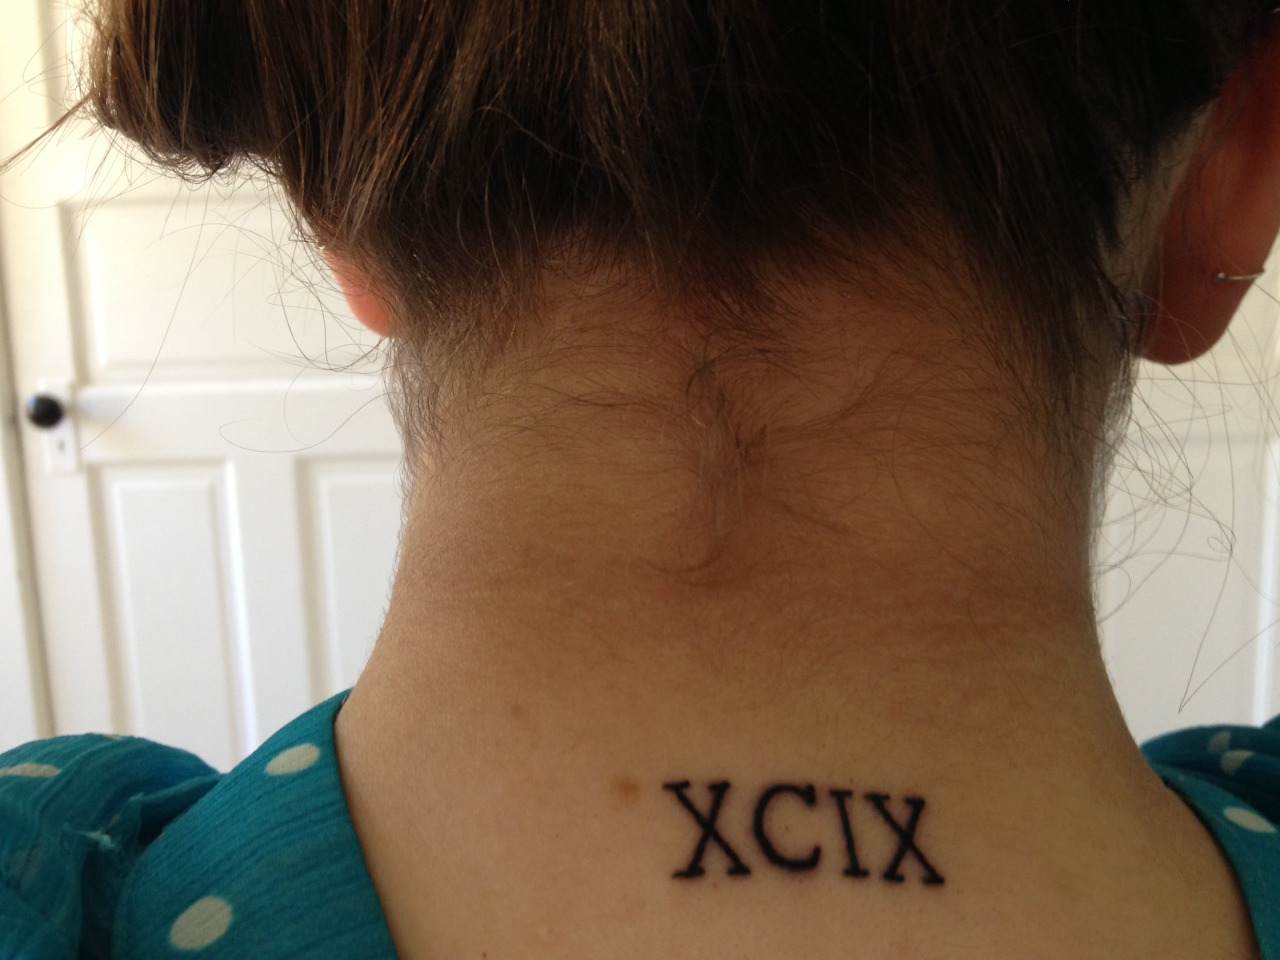 oh baby — here's a picture of my new tattoo XCIX; 99 in...